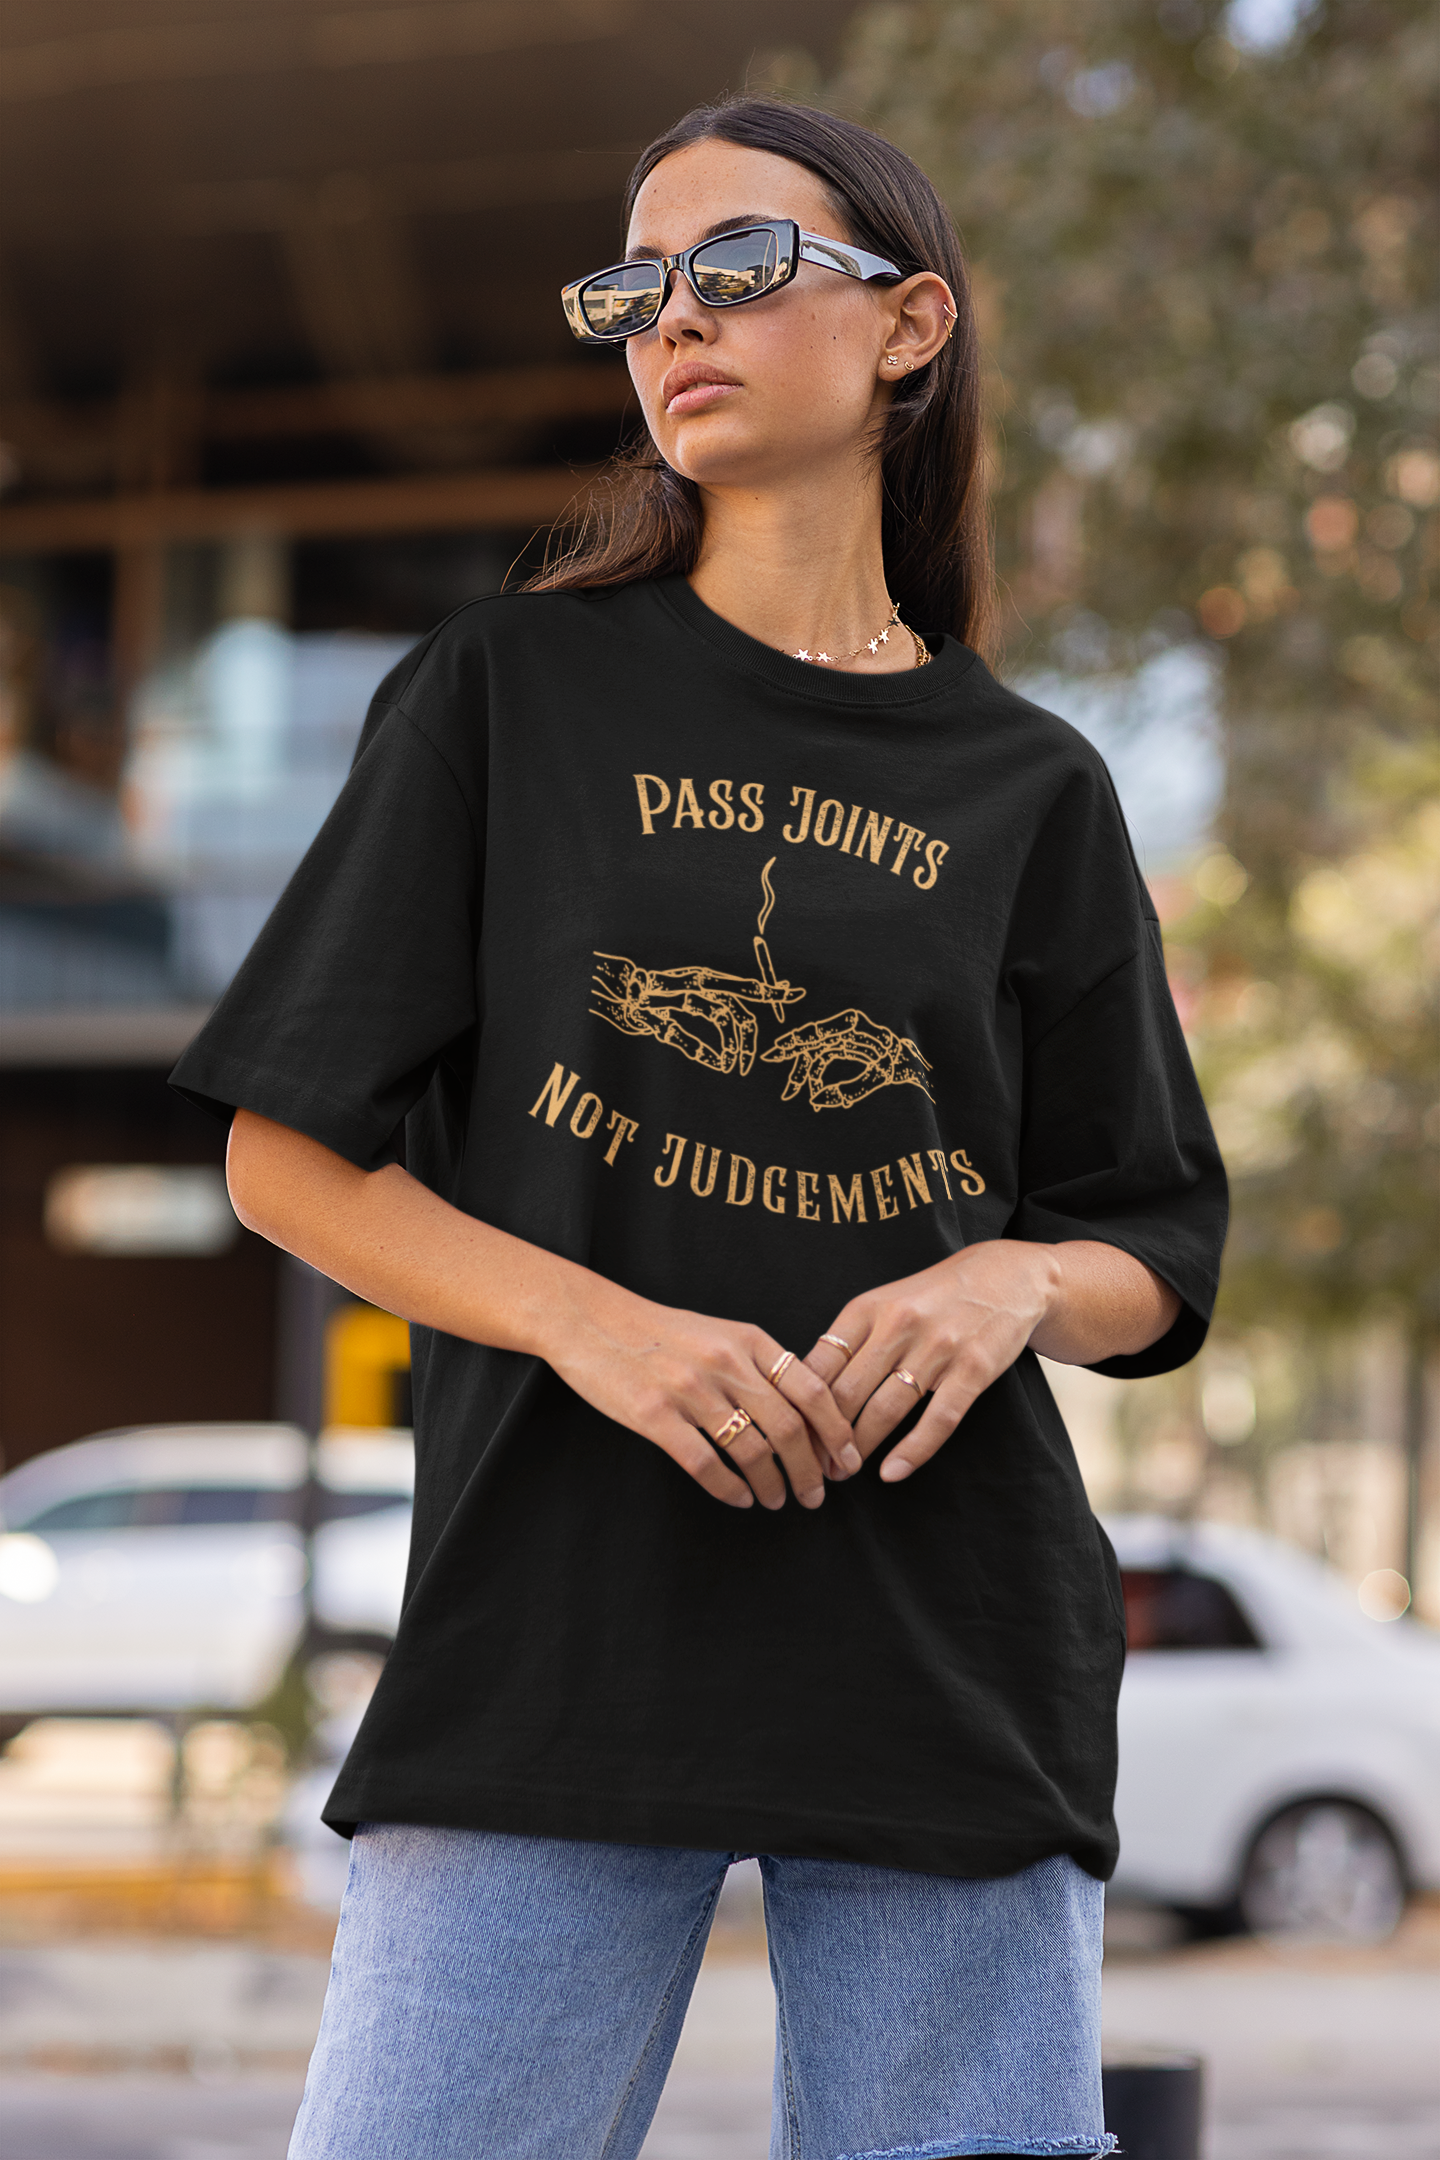 Pass Joints Not Judgement Black Unisex Over-sized T-shirts